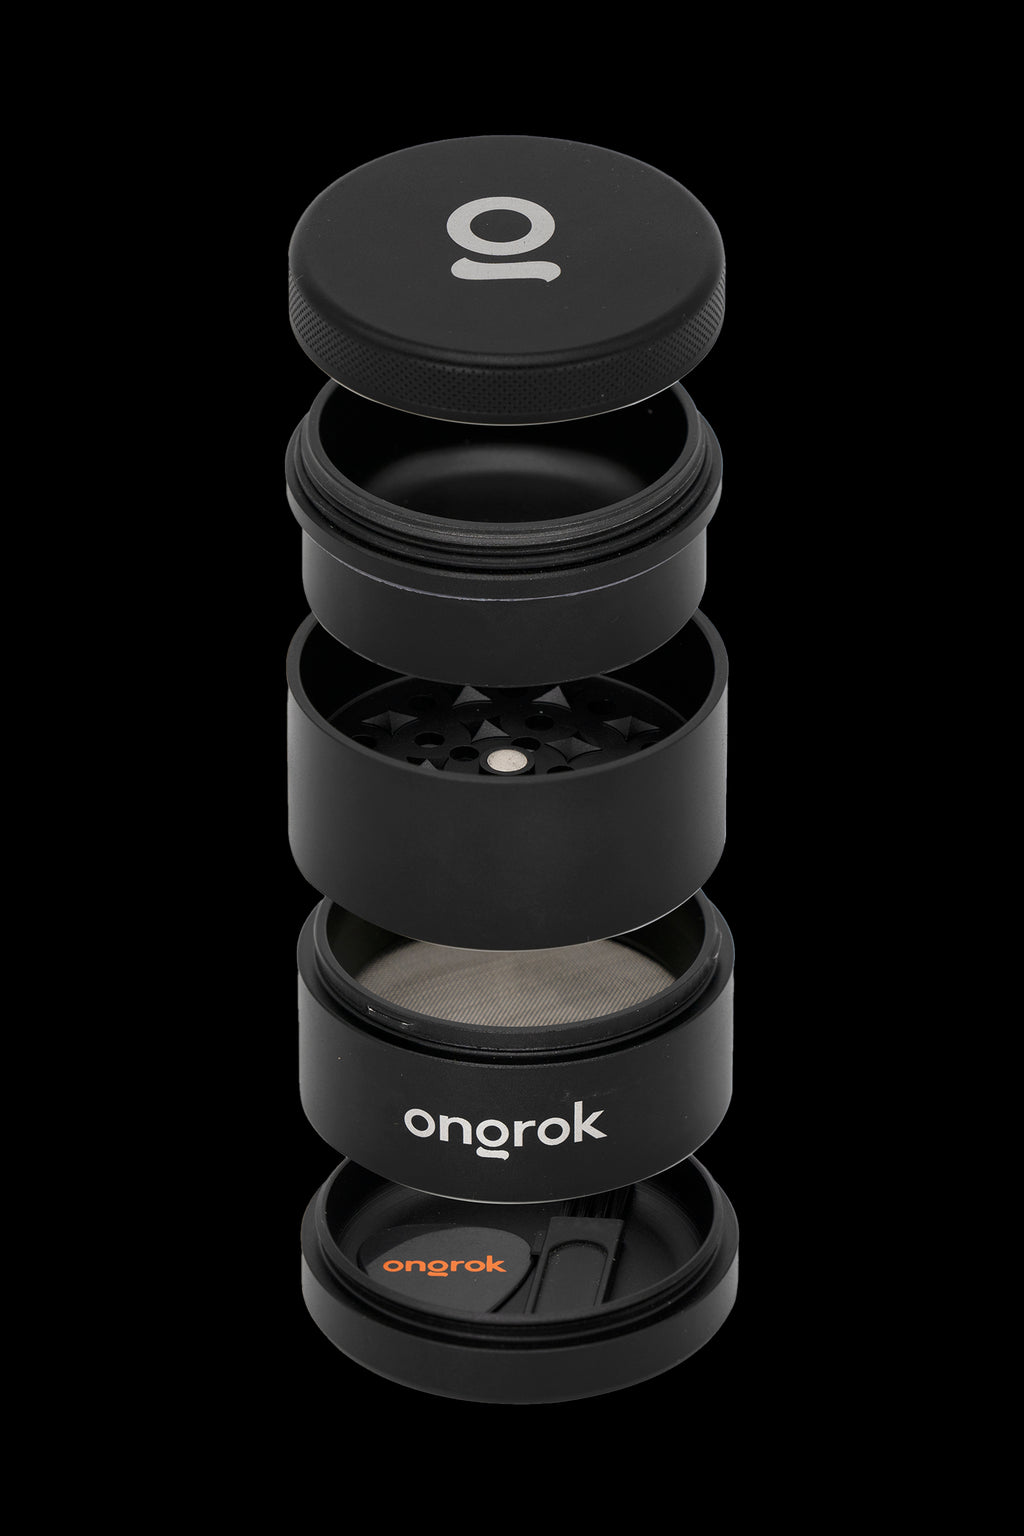 ONGROK 5 Piece Grinder - Mr. Bill's Pipe & Tobacco Company